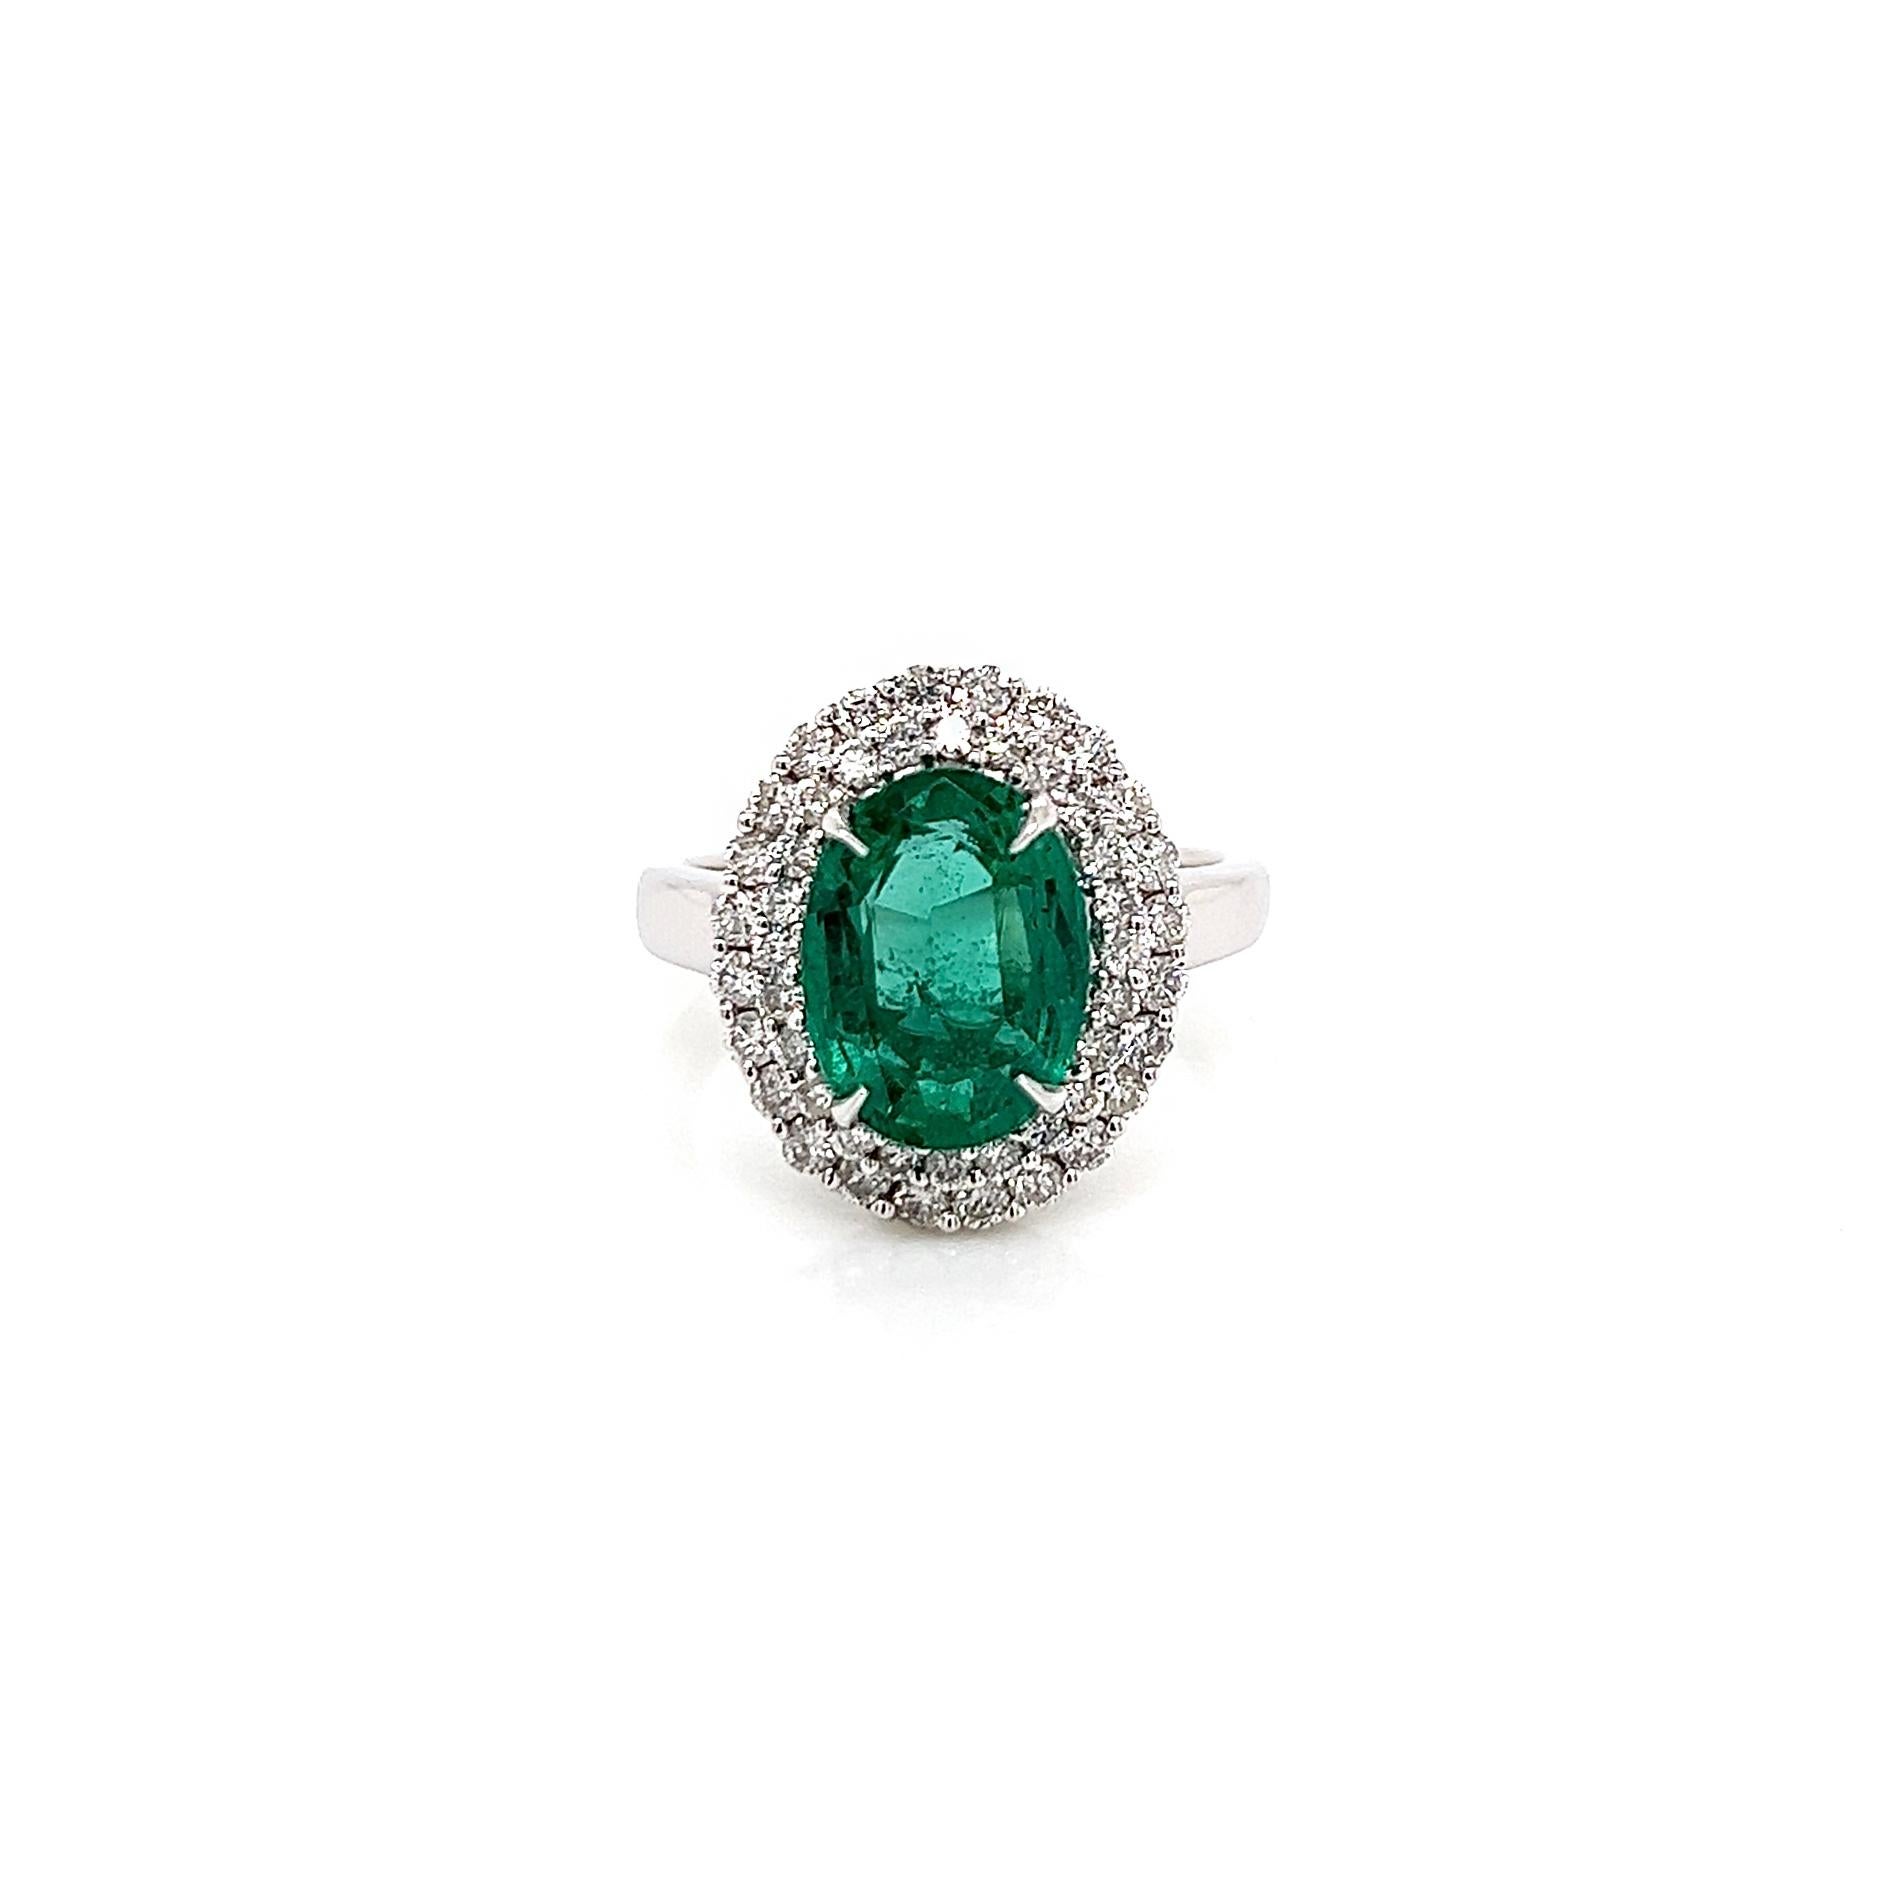 3.83 Total Carat Green Emerald and Diamond Engagement Ring

-Metal Type: 18K White Gold
-3.05 Carat Oval Cut Green Emerald
-0.78 Carat Round Natural Diamonds (Total), G-H Color, SI Clarity
-Size 6.75

Made in New York City